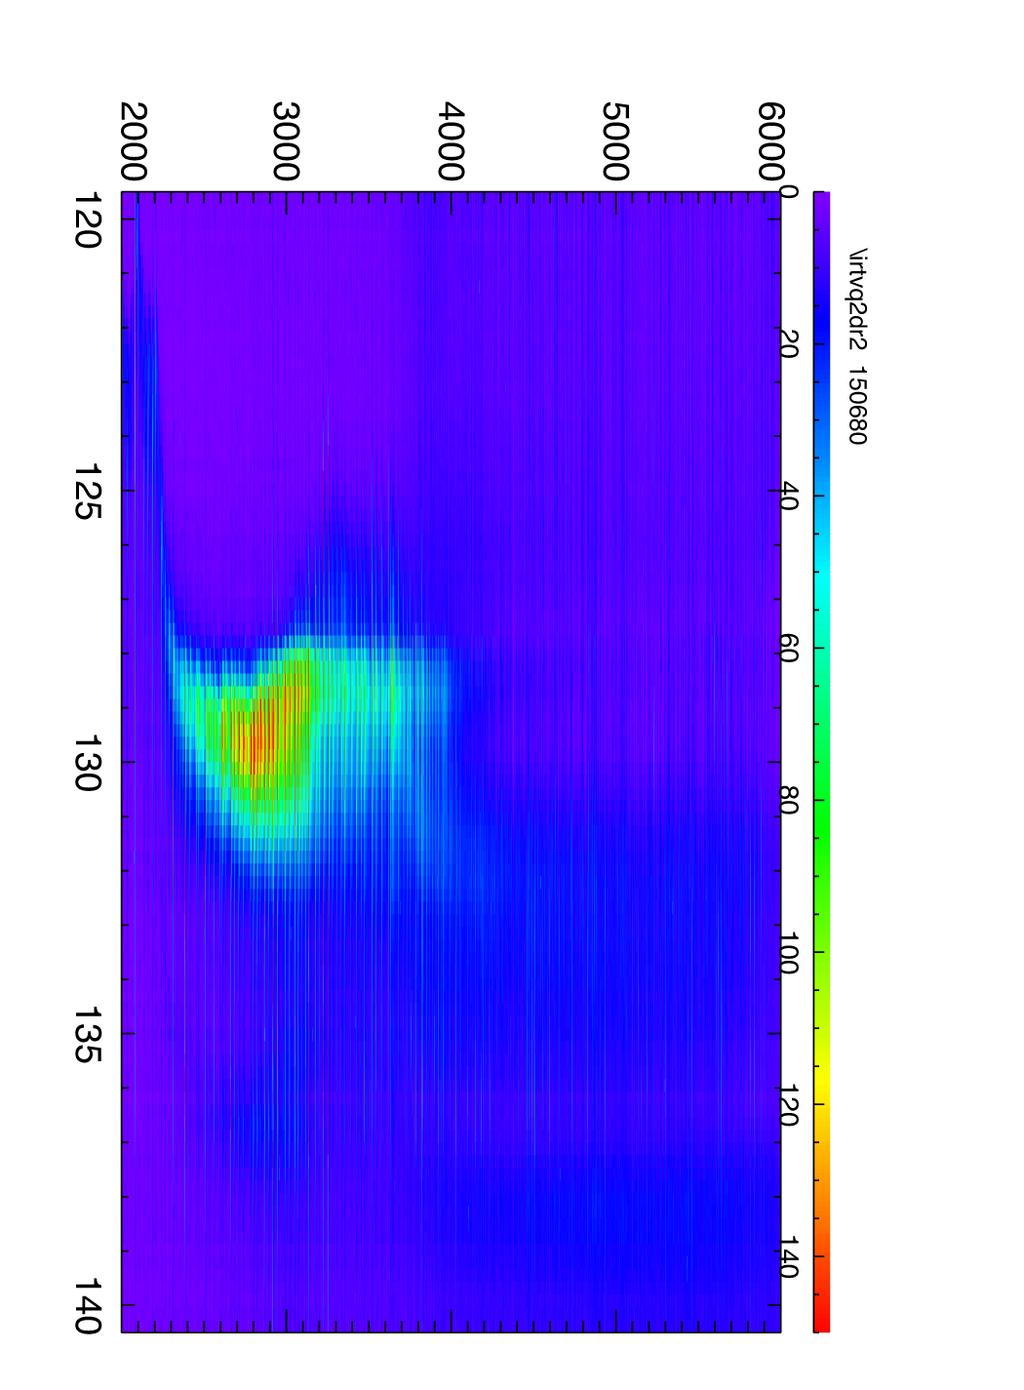 SF + Gas Puff Reduced ELM divertor heat flux over GP alone Expanded Divertor Radiation Zone in